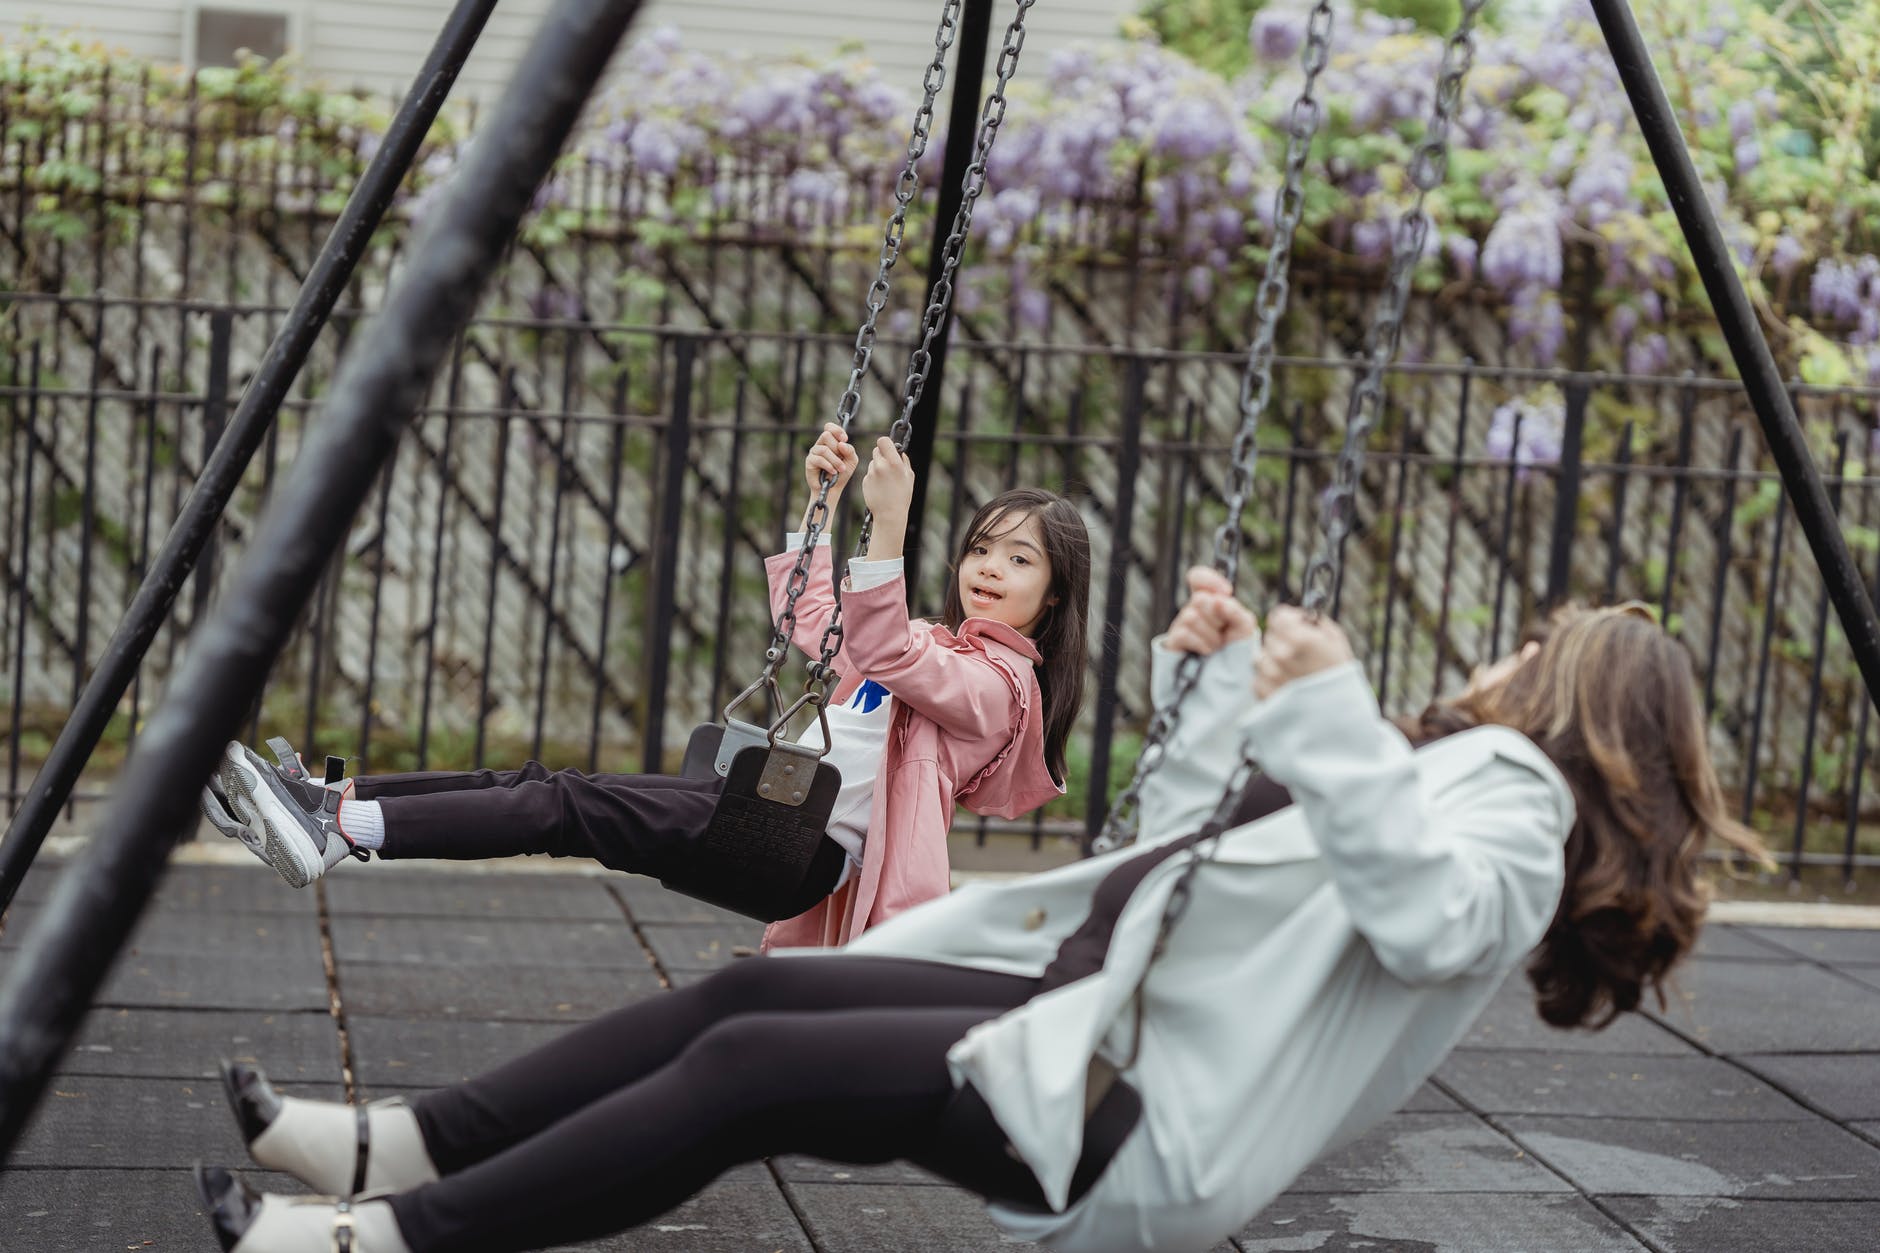 a woman and a young girl playing on the swing